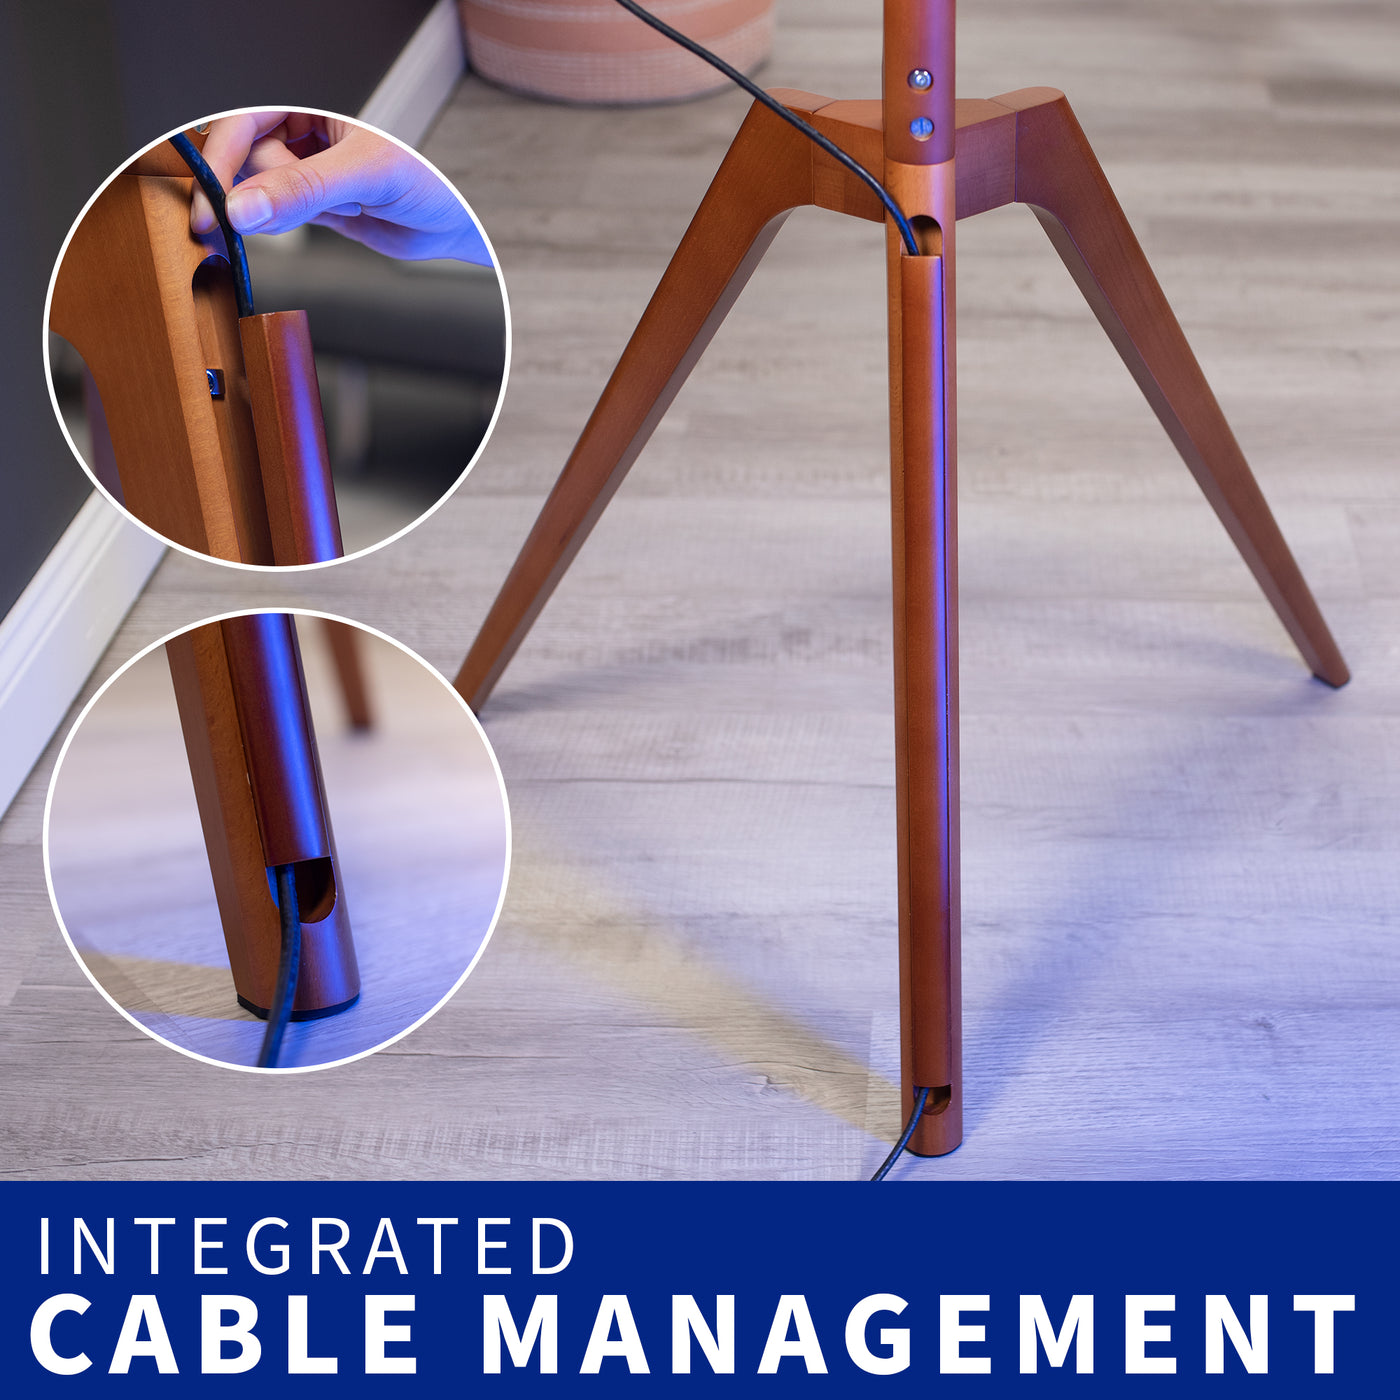 Solid wood TV floor stand with swivel, height adjust, and cable management.